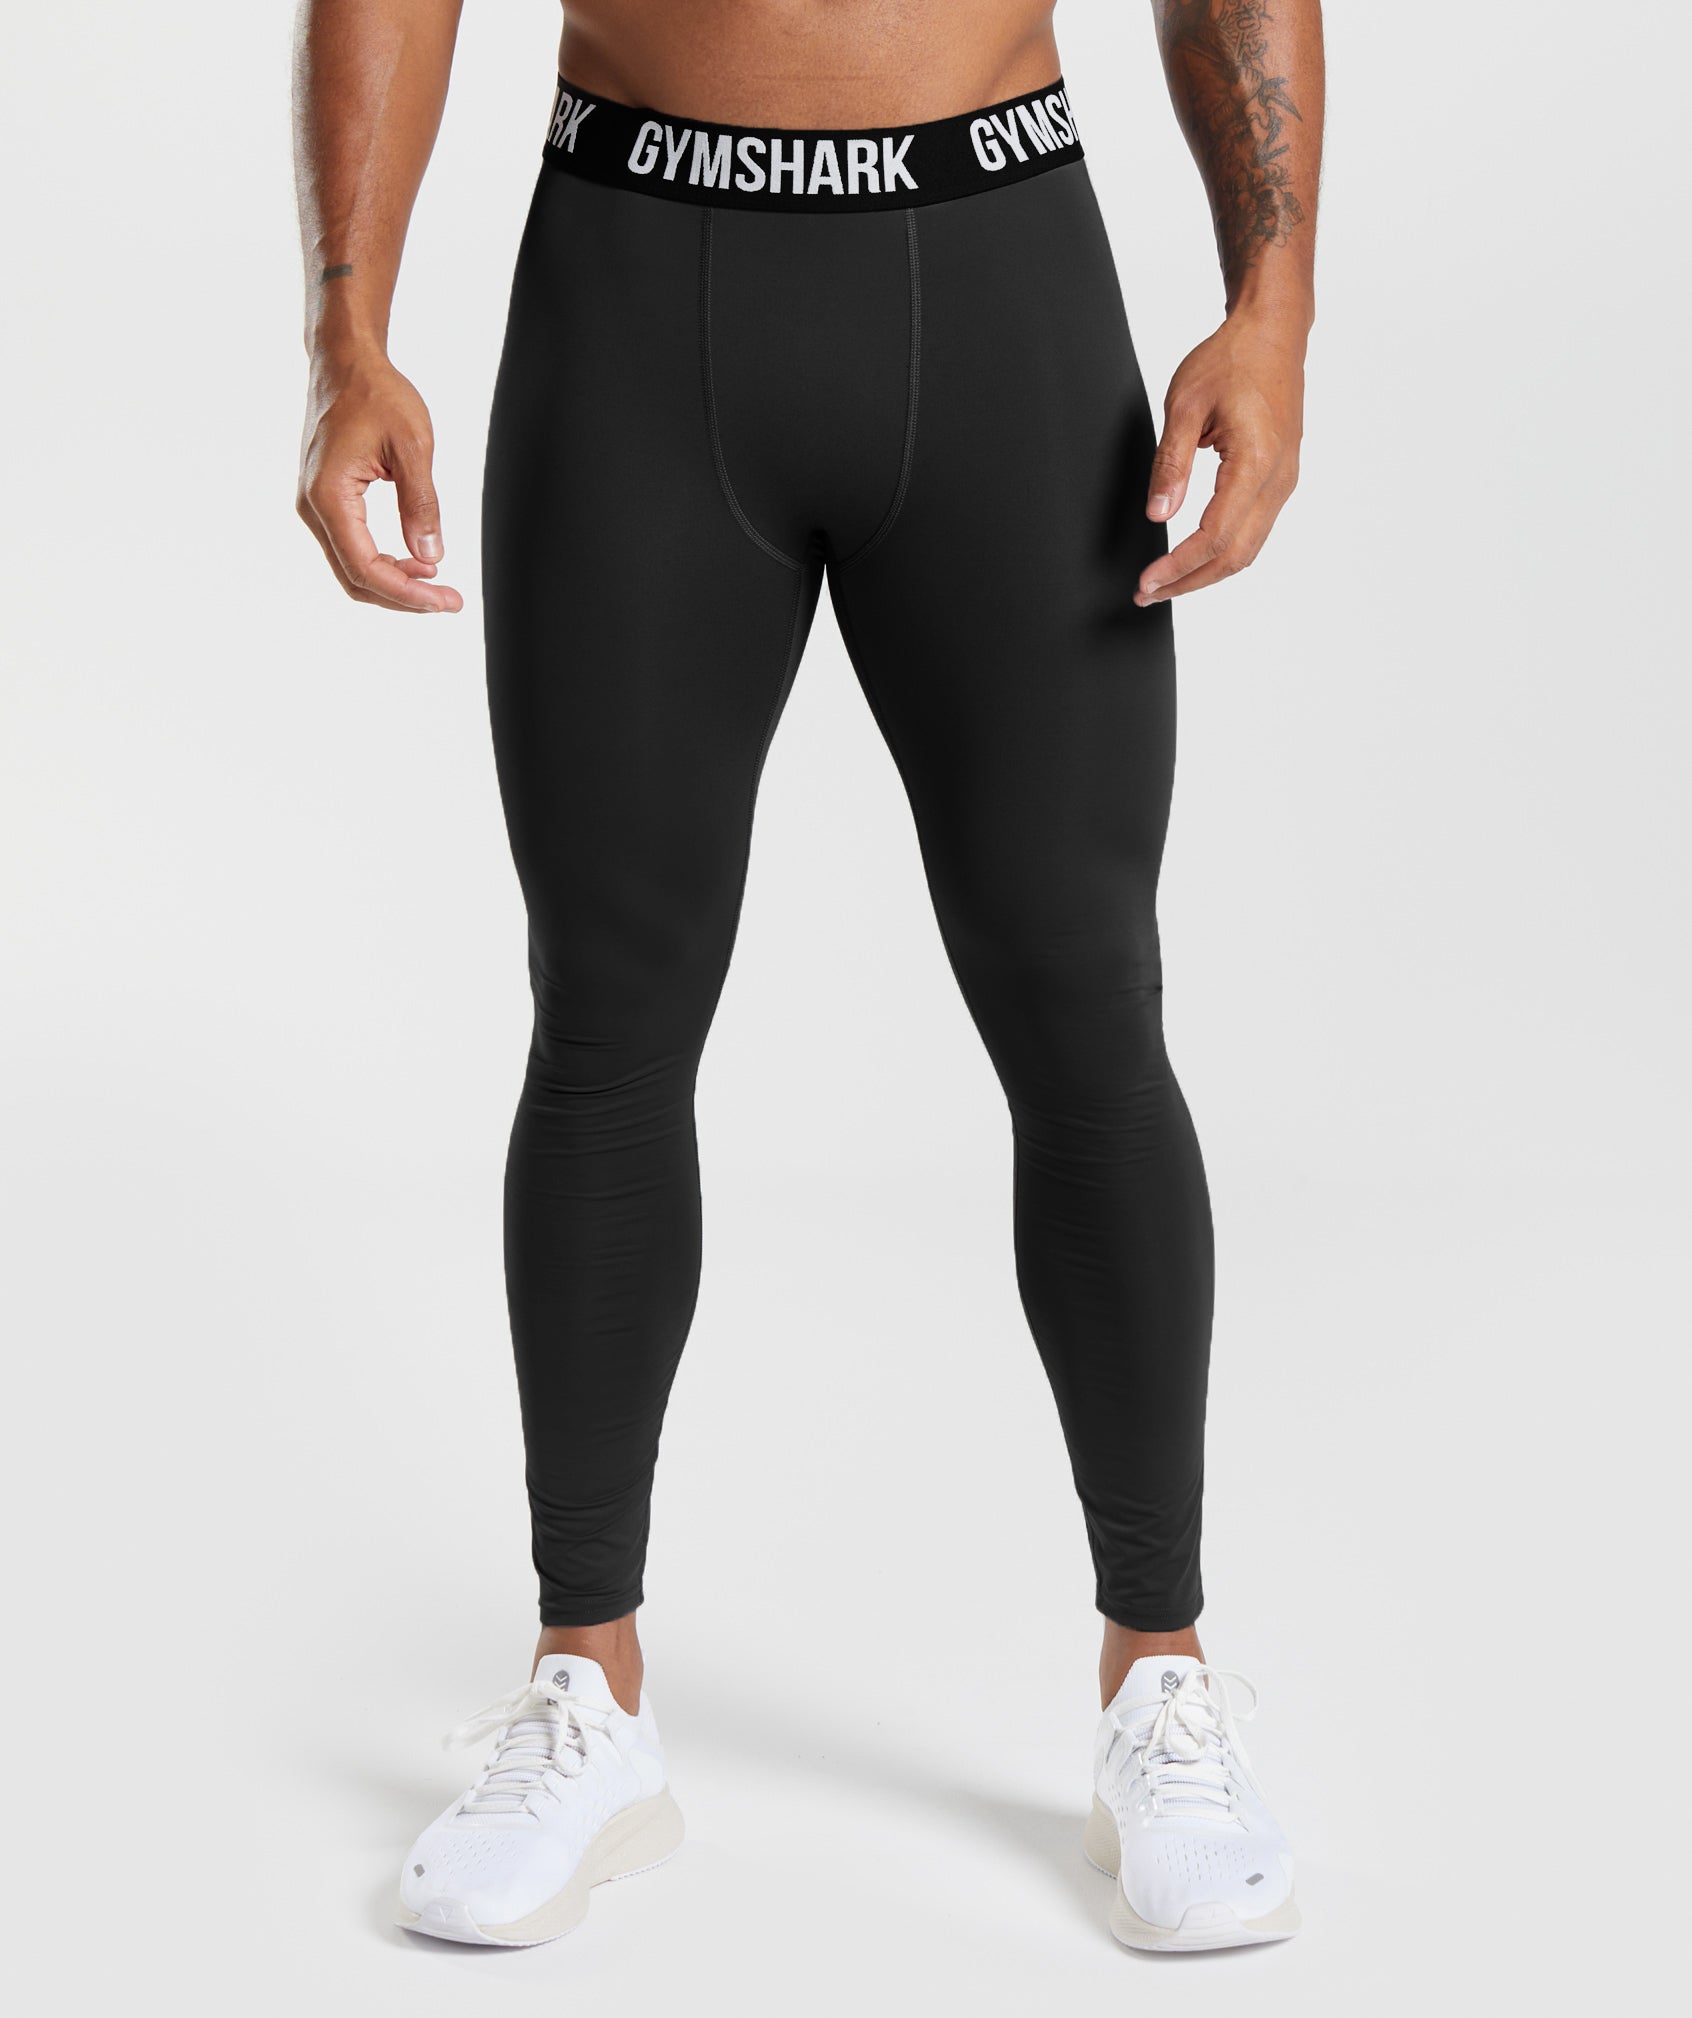 BCG Men's Performance Full Length Compression Tights | Academy